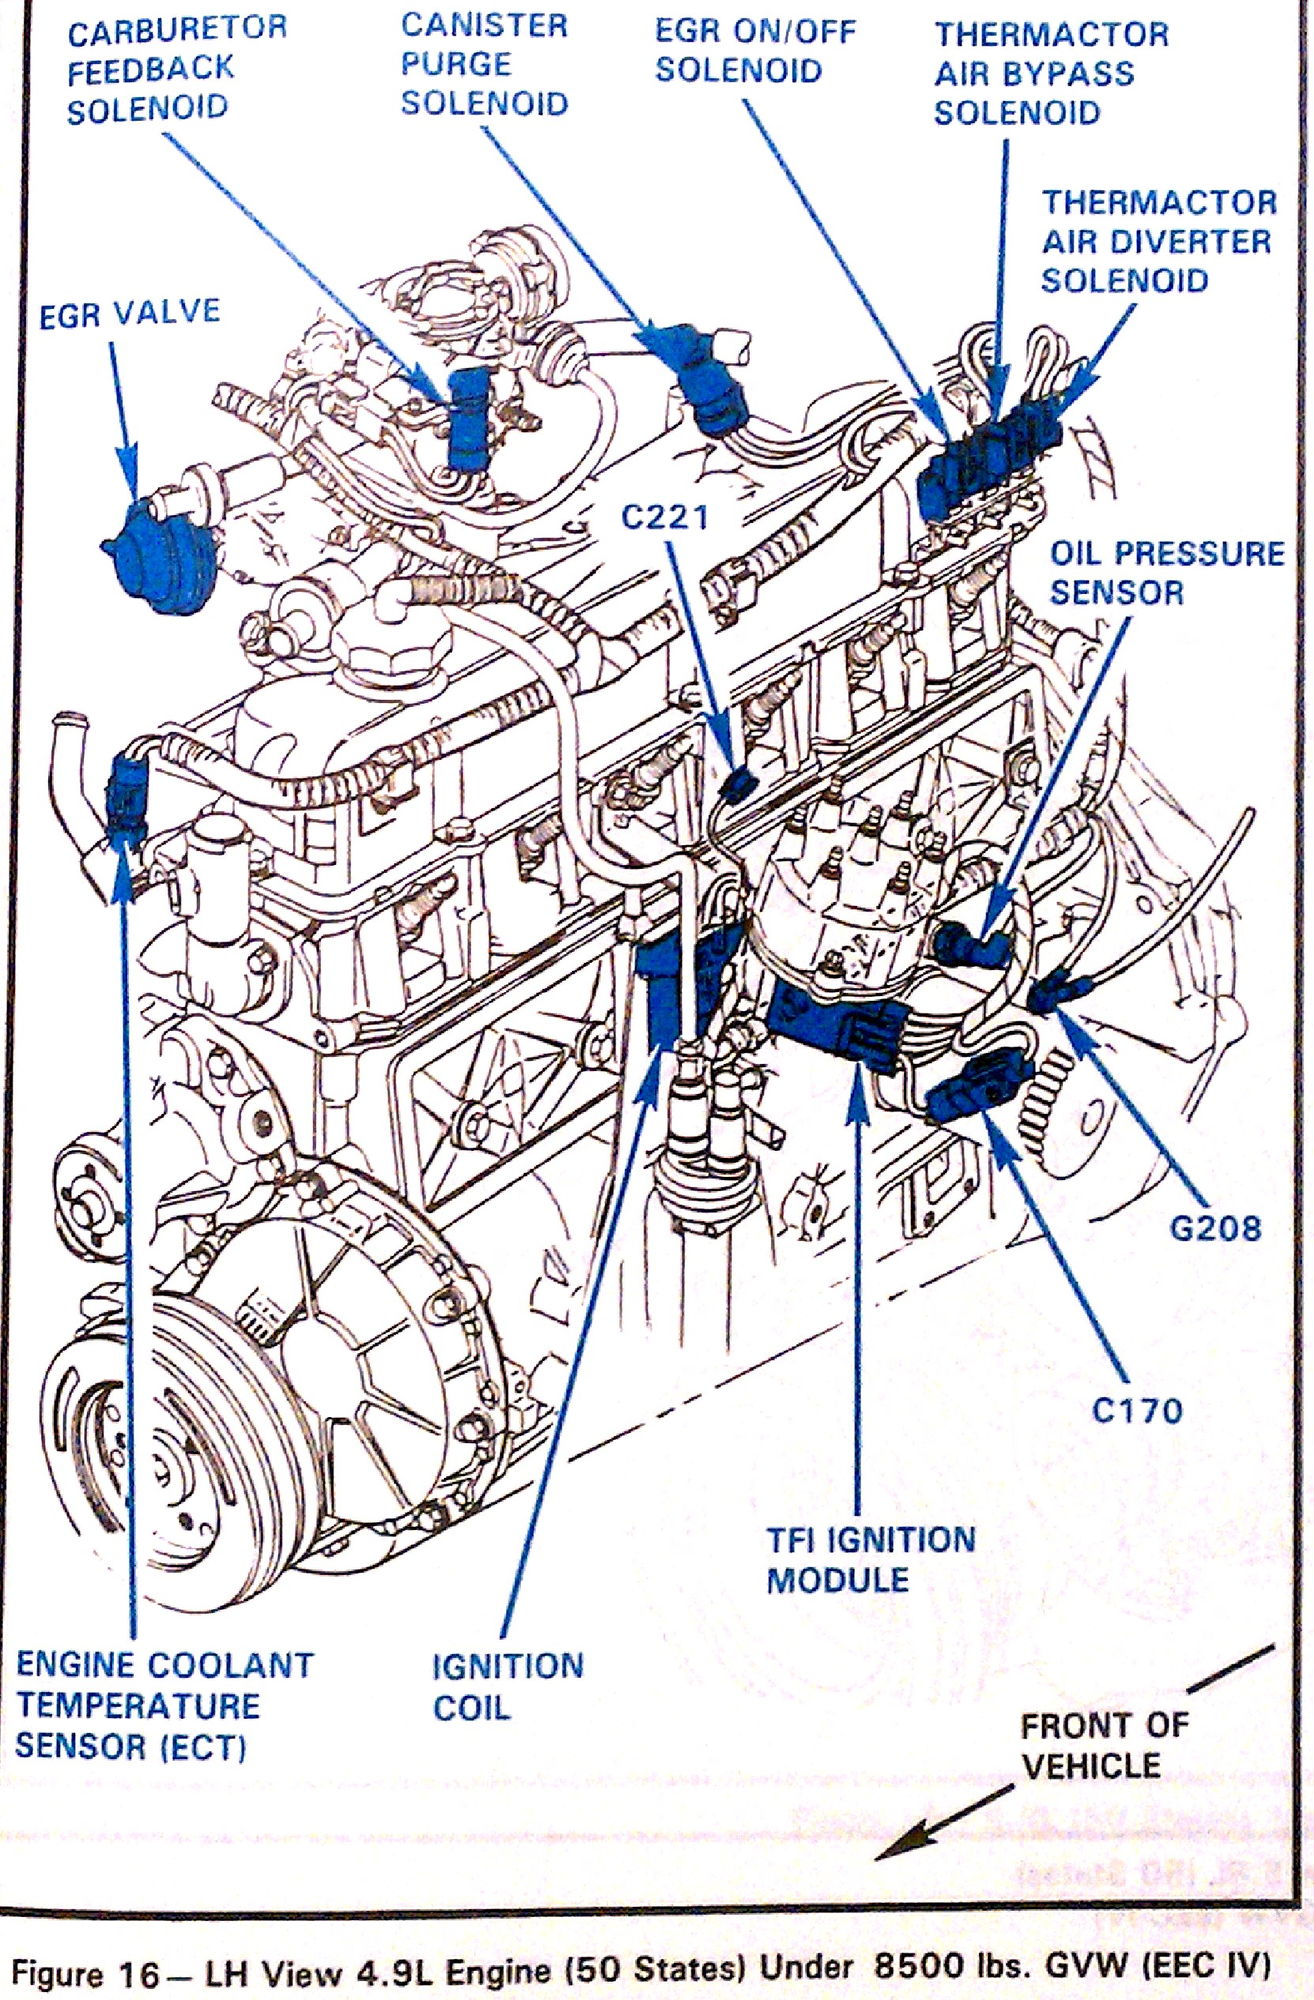 1985 ford f150 300 inline 6 smog help - Ford Truck Enthusiasts Forums